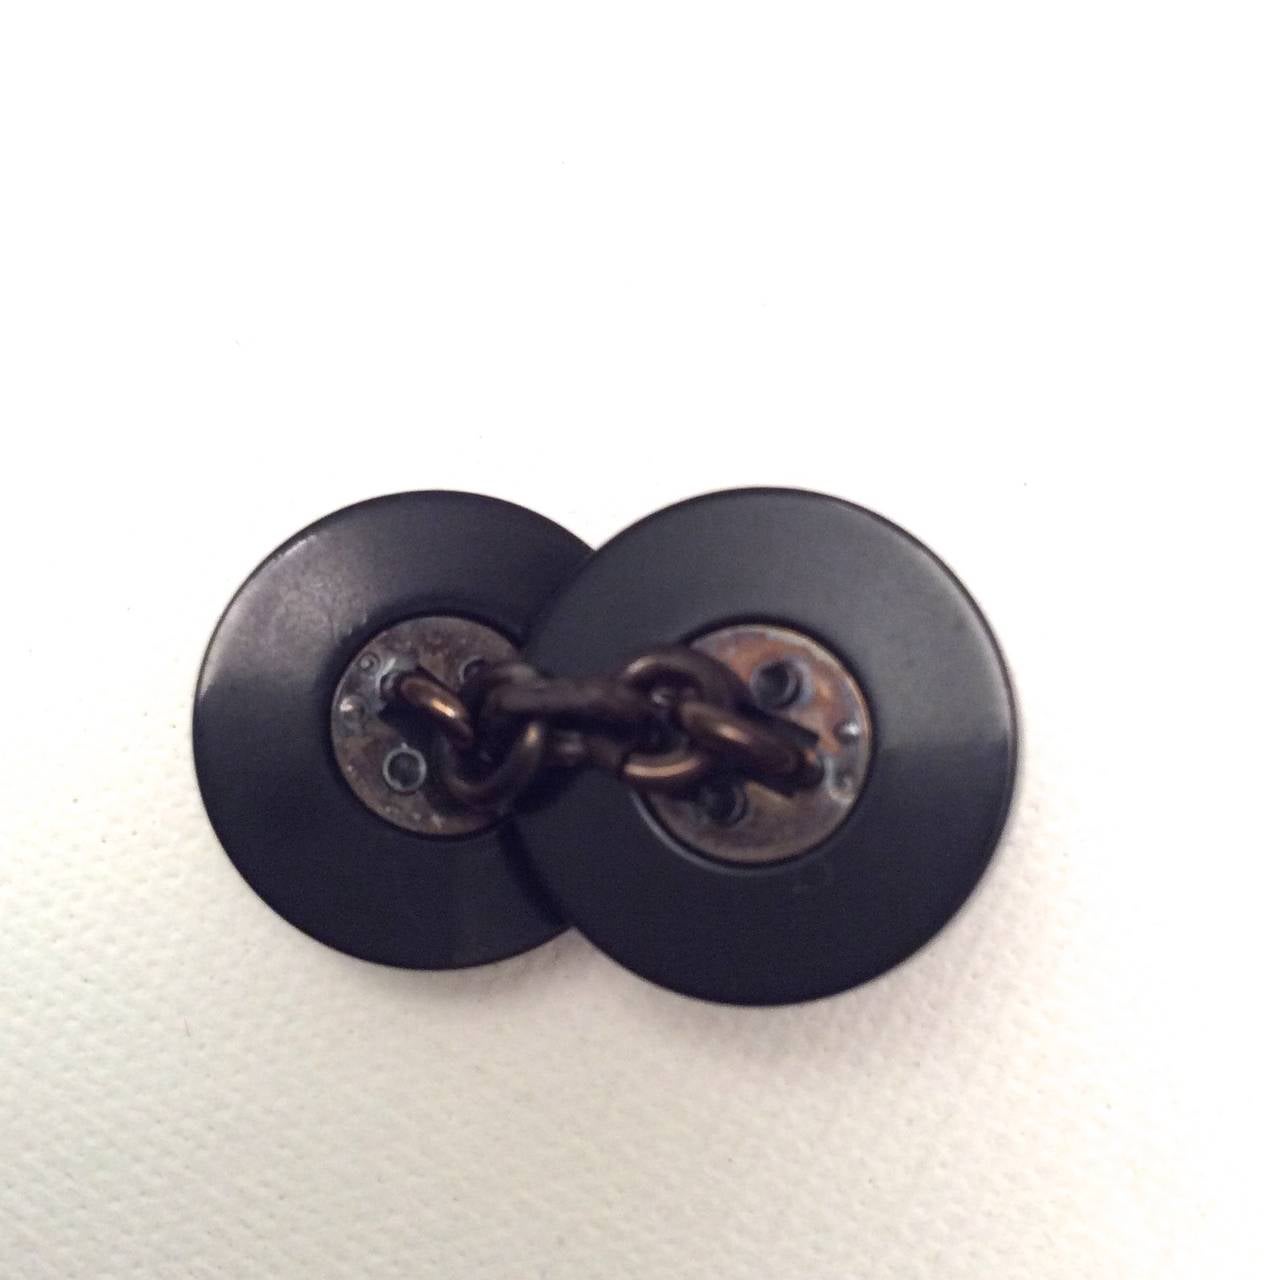 A pair of Chanel black cufflinks with CC logo. There is a Chanel signature on the inside of each of the buttons of the cufflinks. The exterior of each of the cufflink buttons has an embossed iconic Chanel CC logo. The cufflinks are from the 1980's.